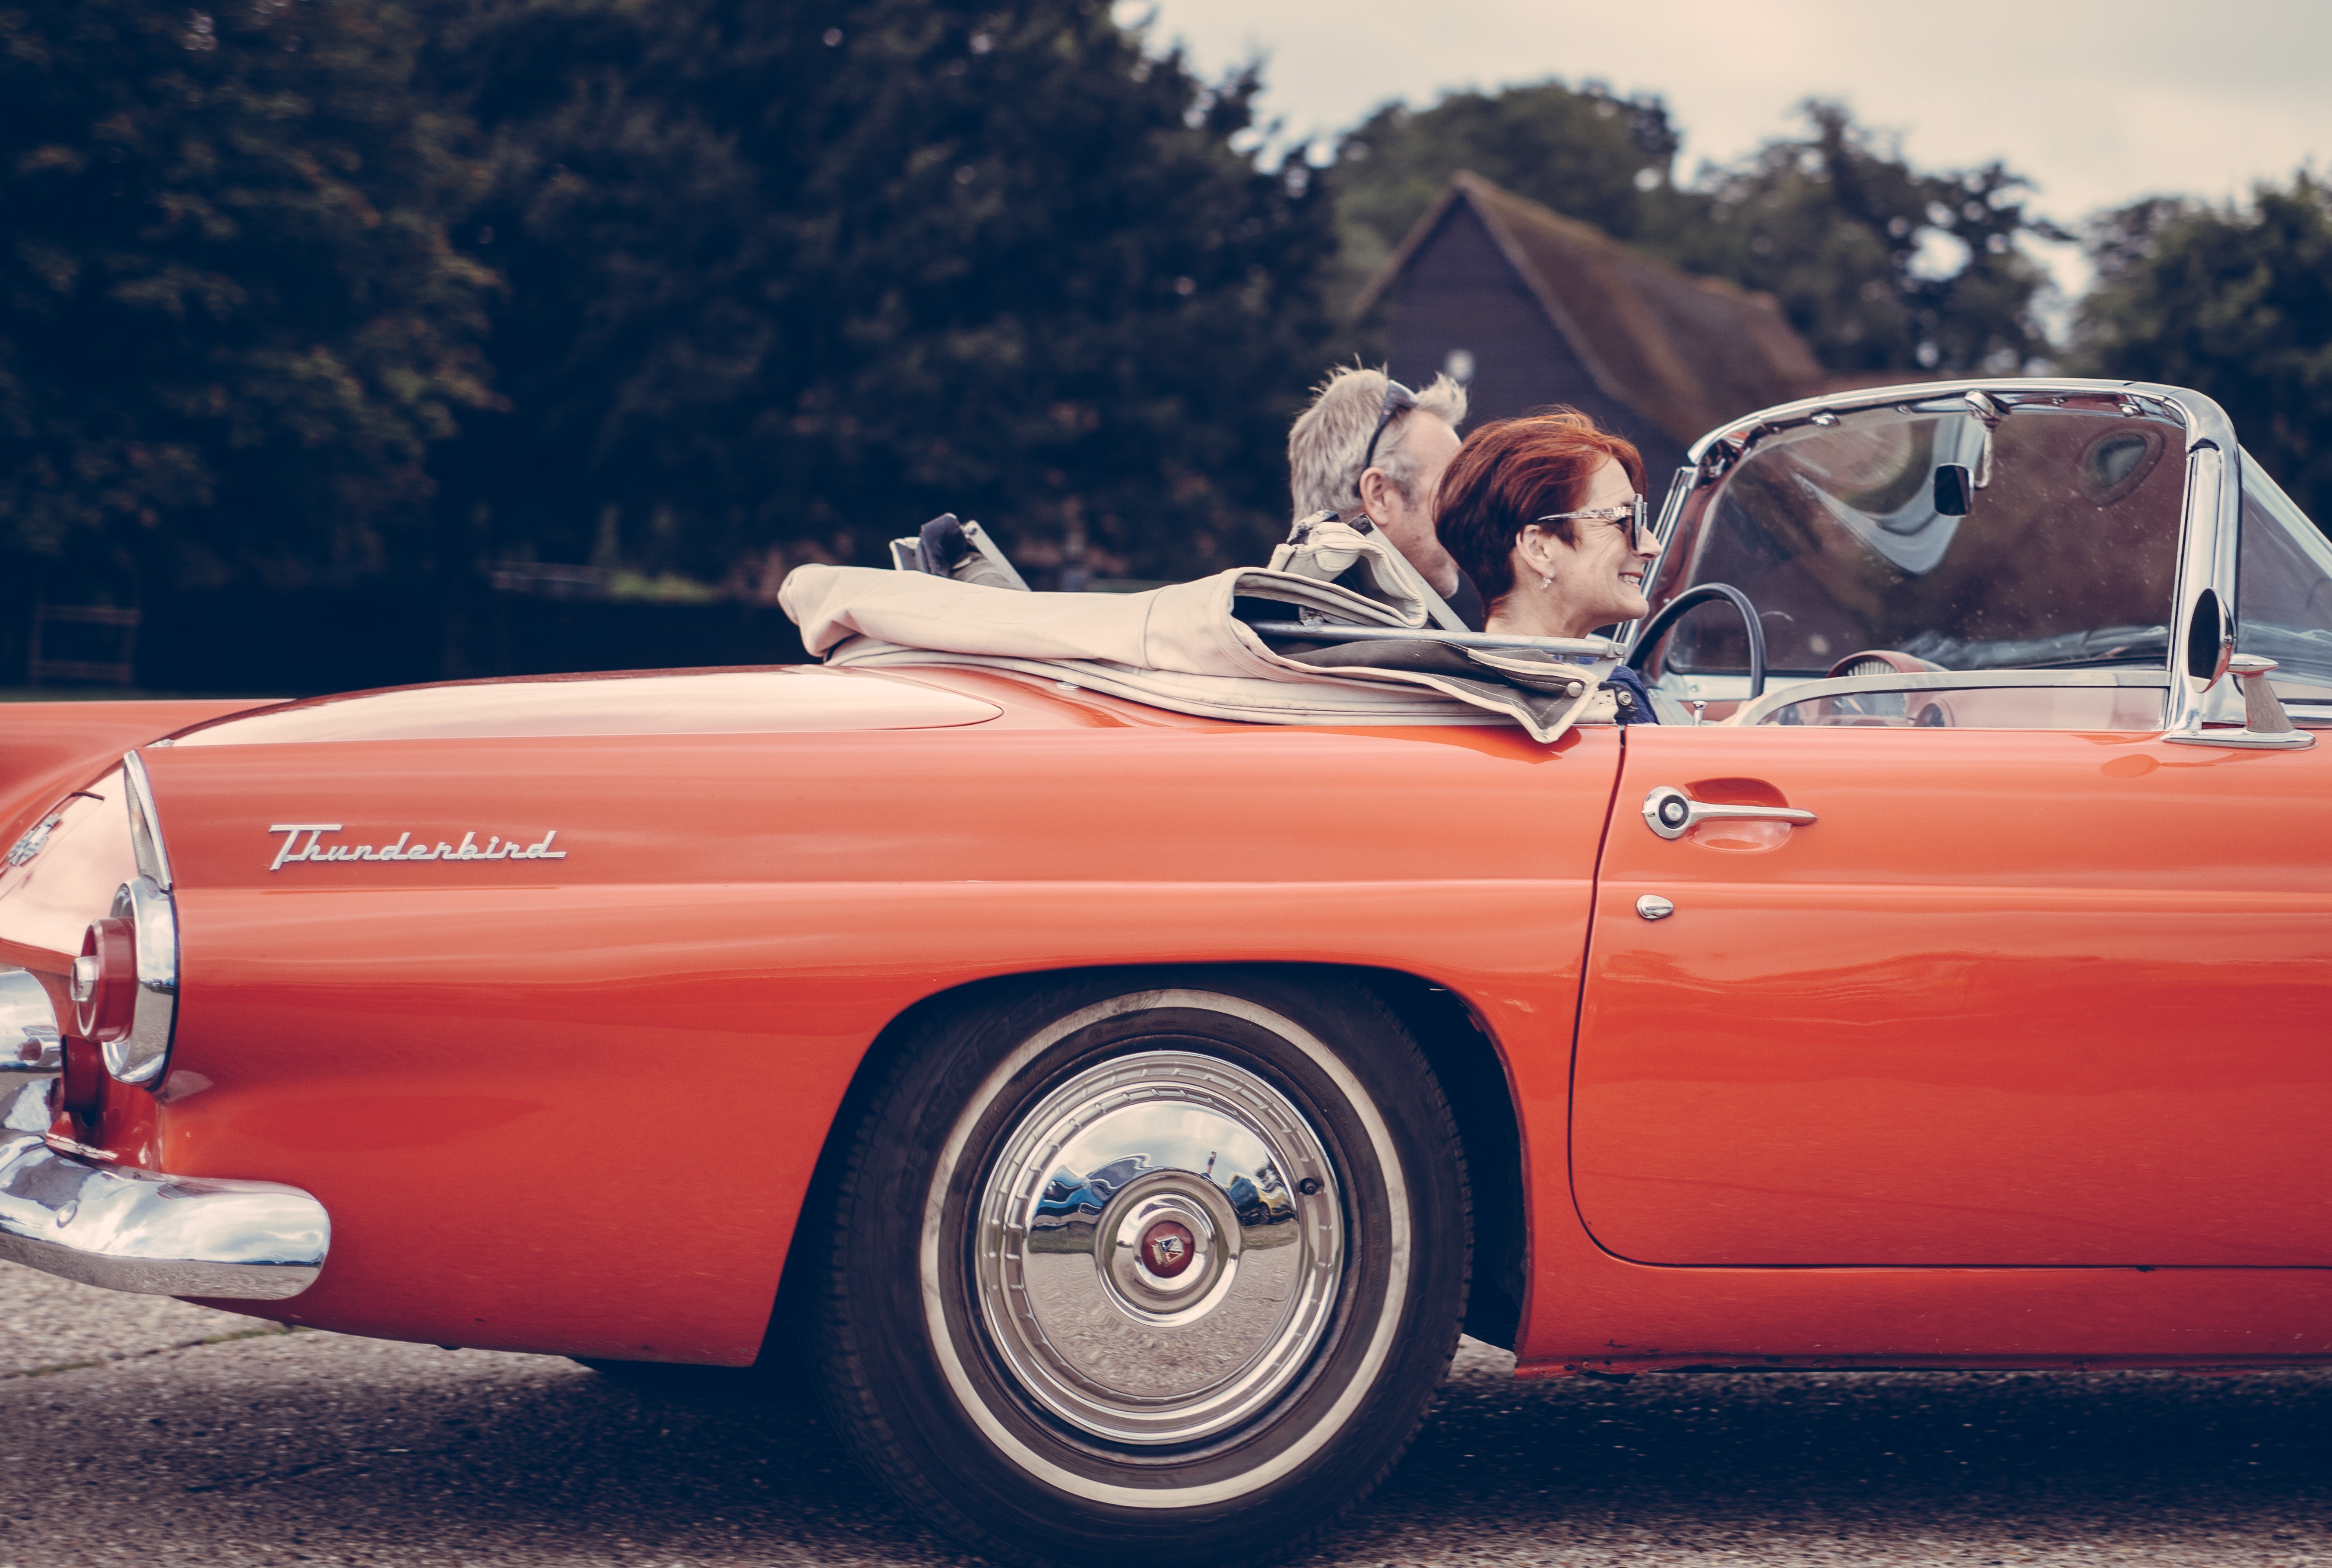 Couple riding red ford thunderbird during daytime photo